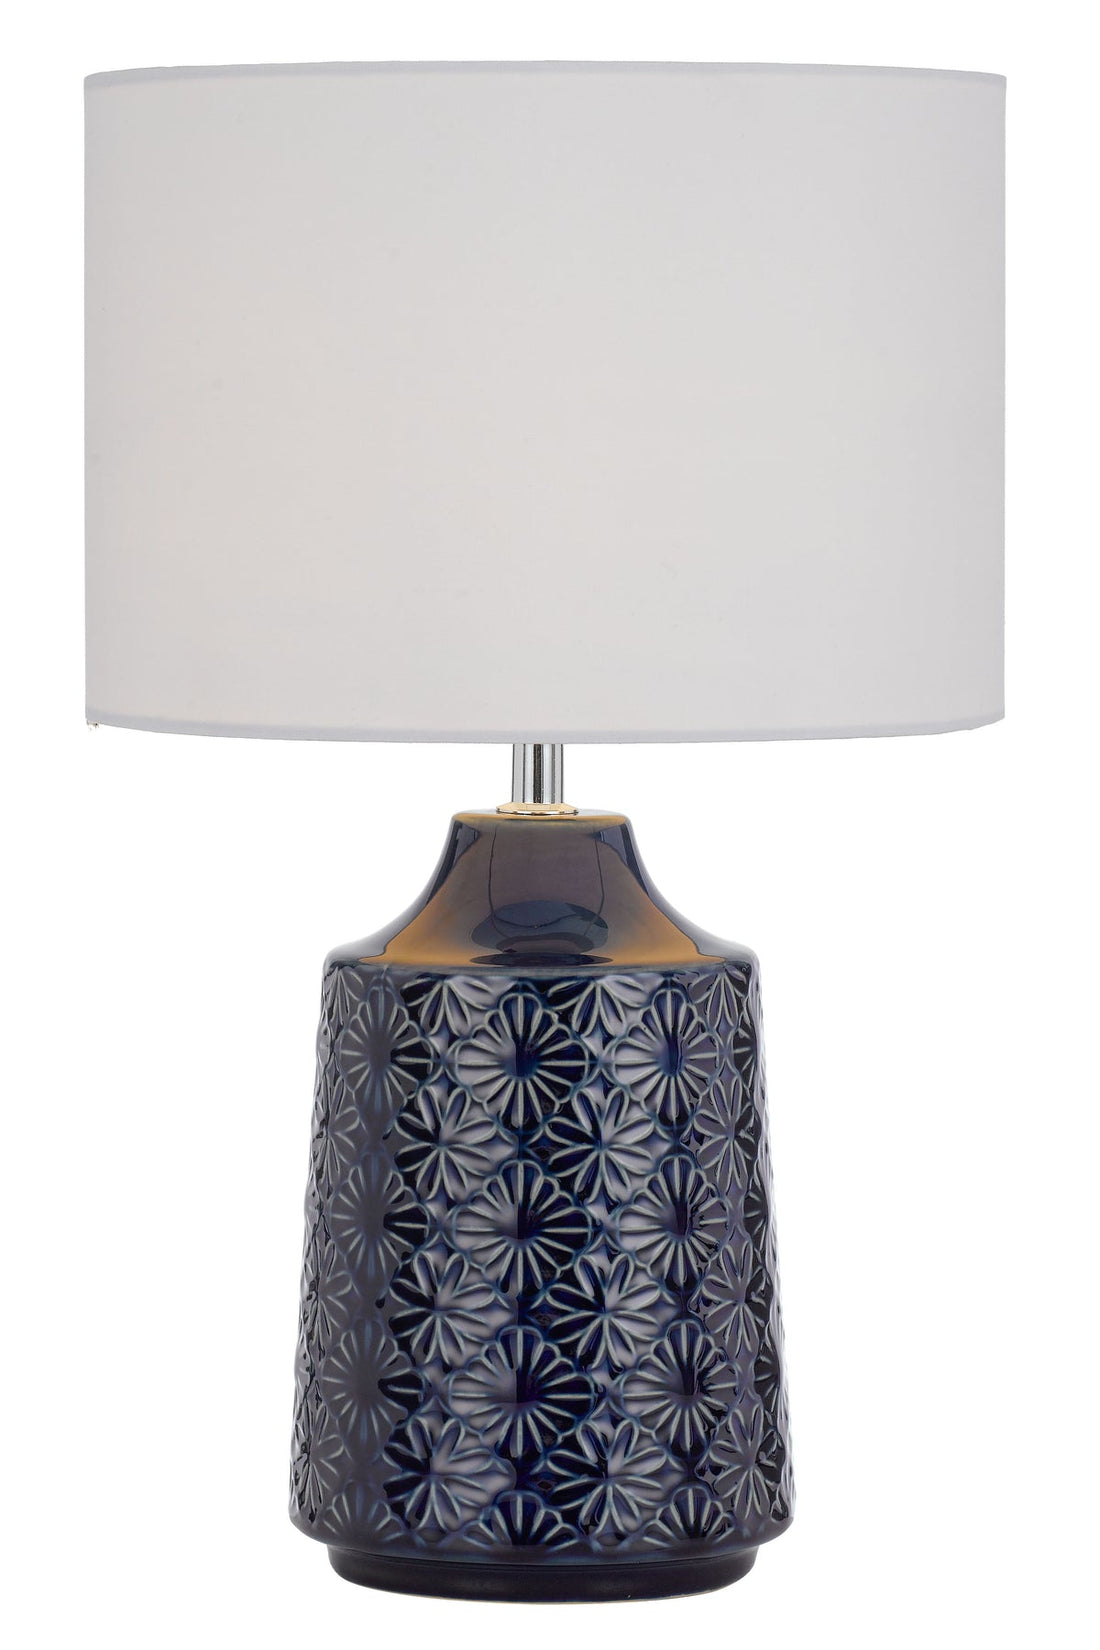 Fedon Blue and White Classic Ceramic Table Lamp